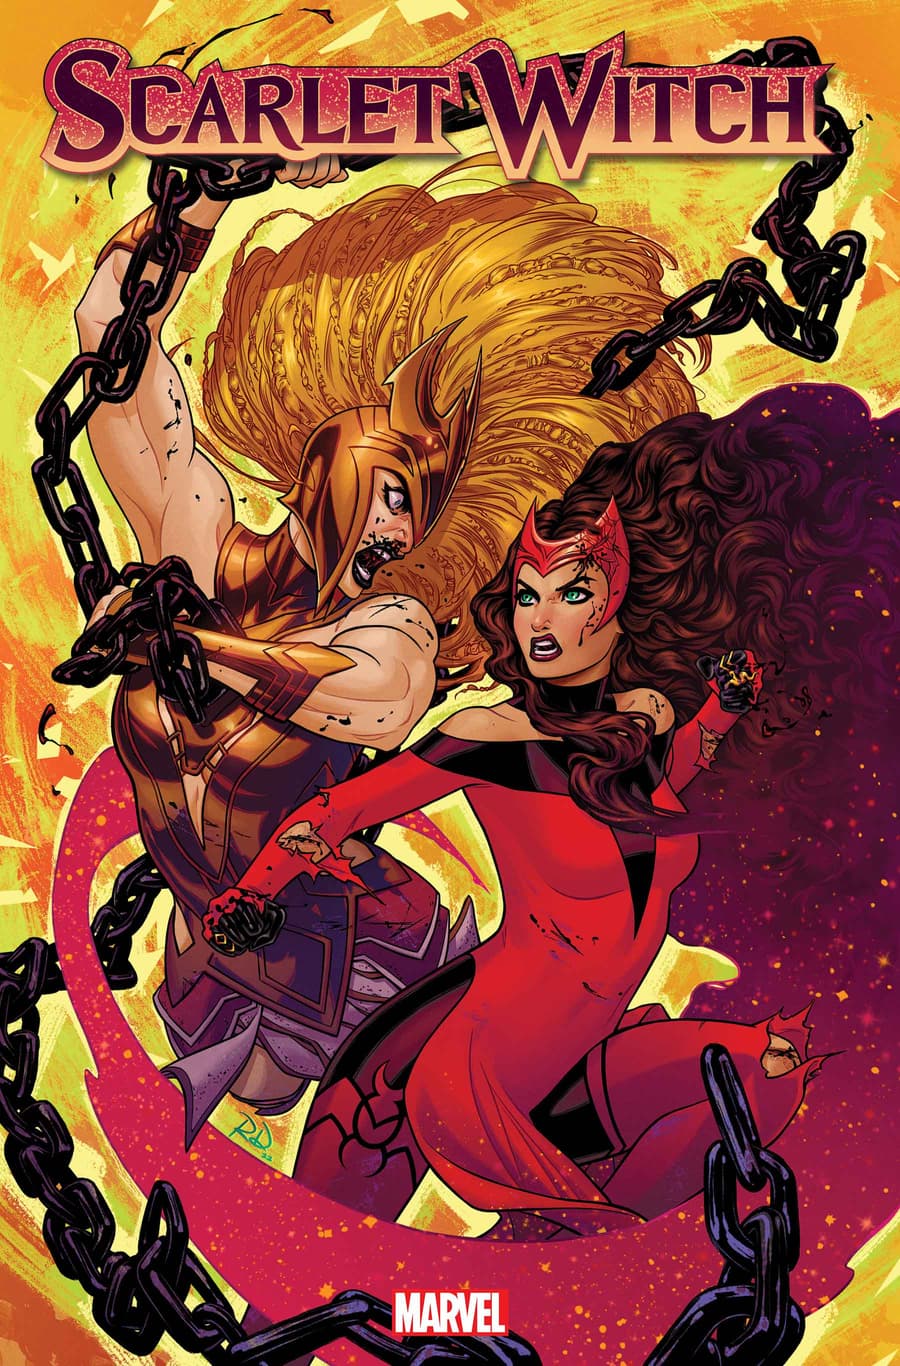 SCARLET WITCH #5 cover by Russell Dauterman